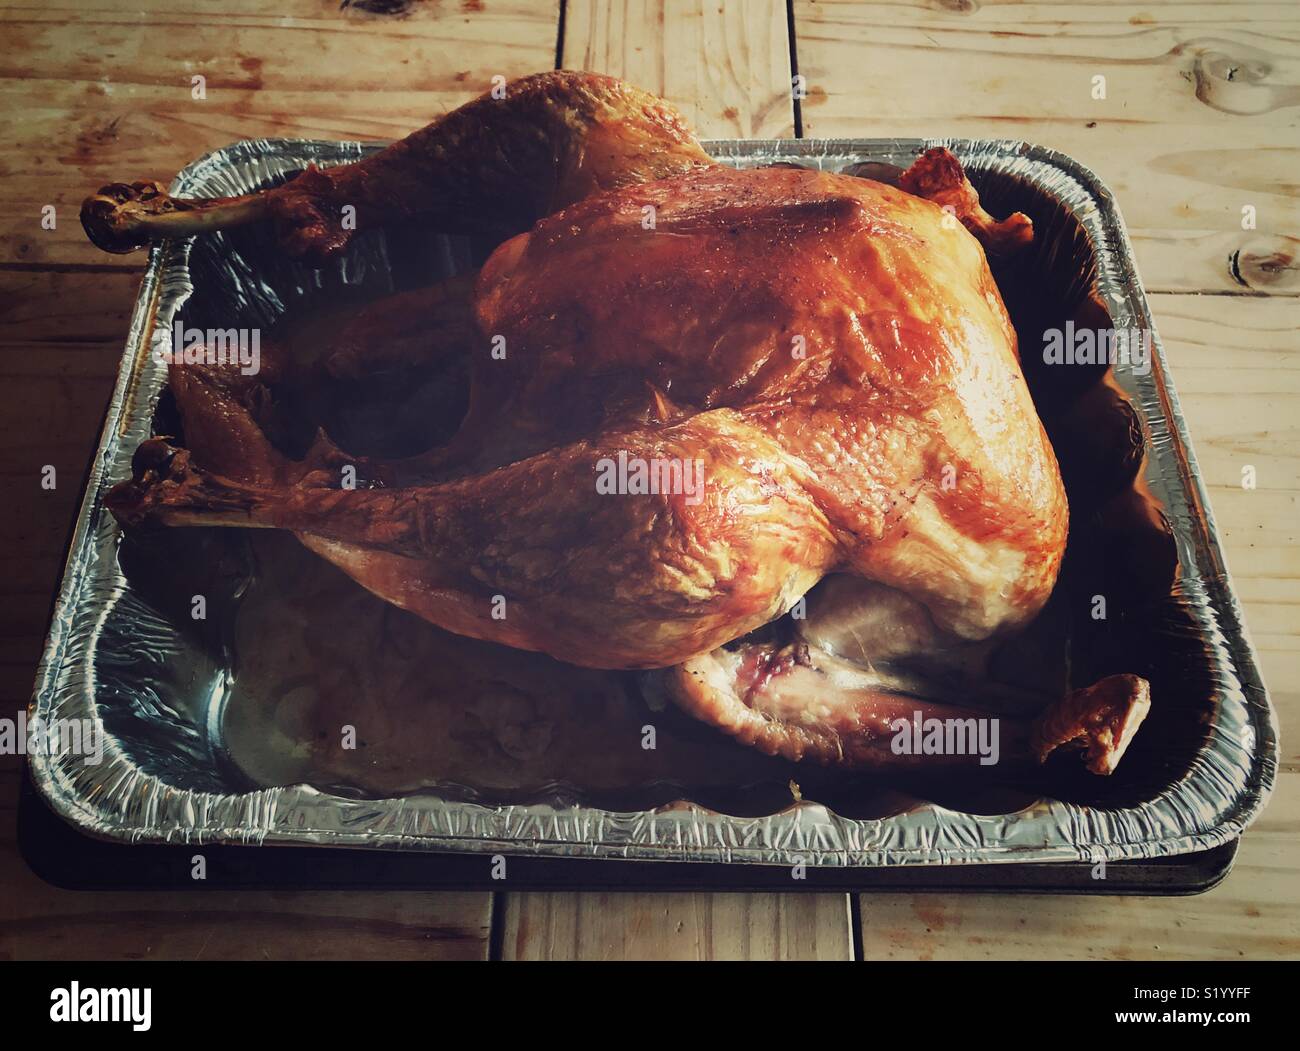 Golden brown, just roasted turkey in an aluminum pan on a rustic wooden table Stock Photo